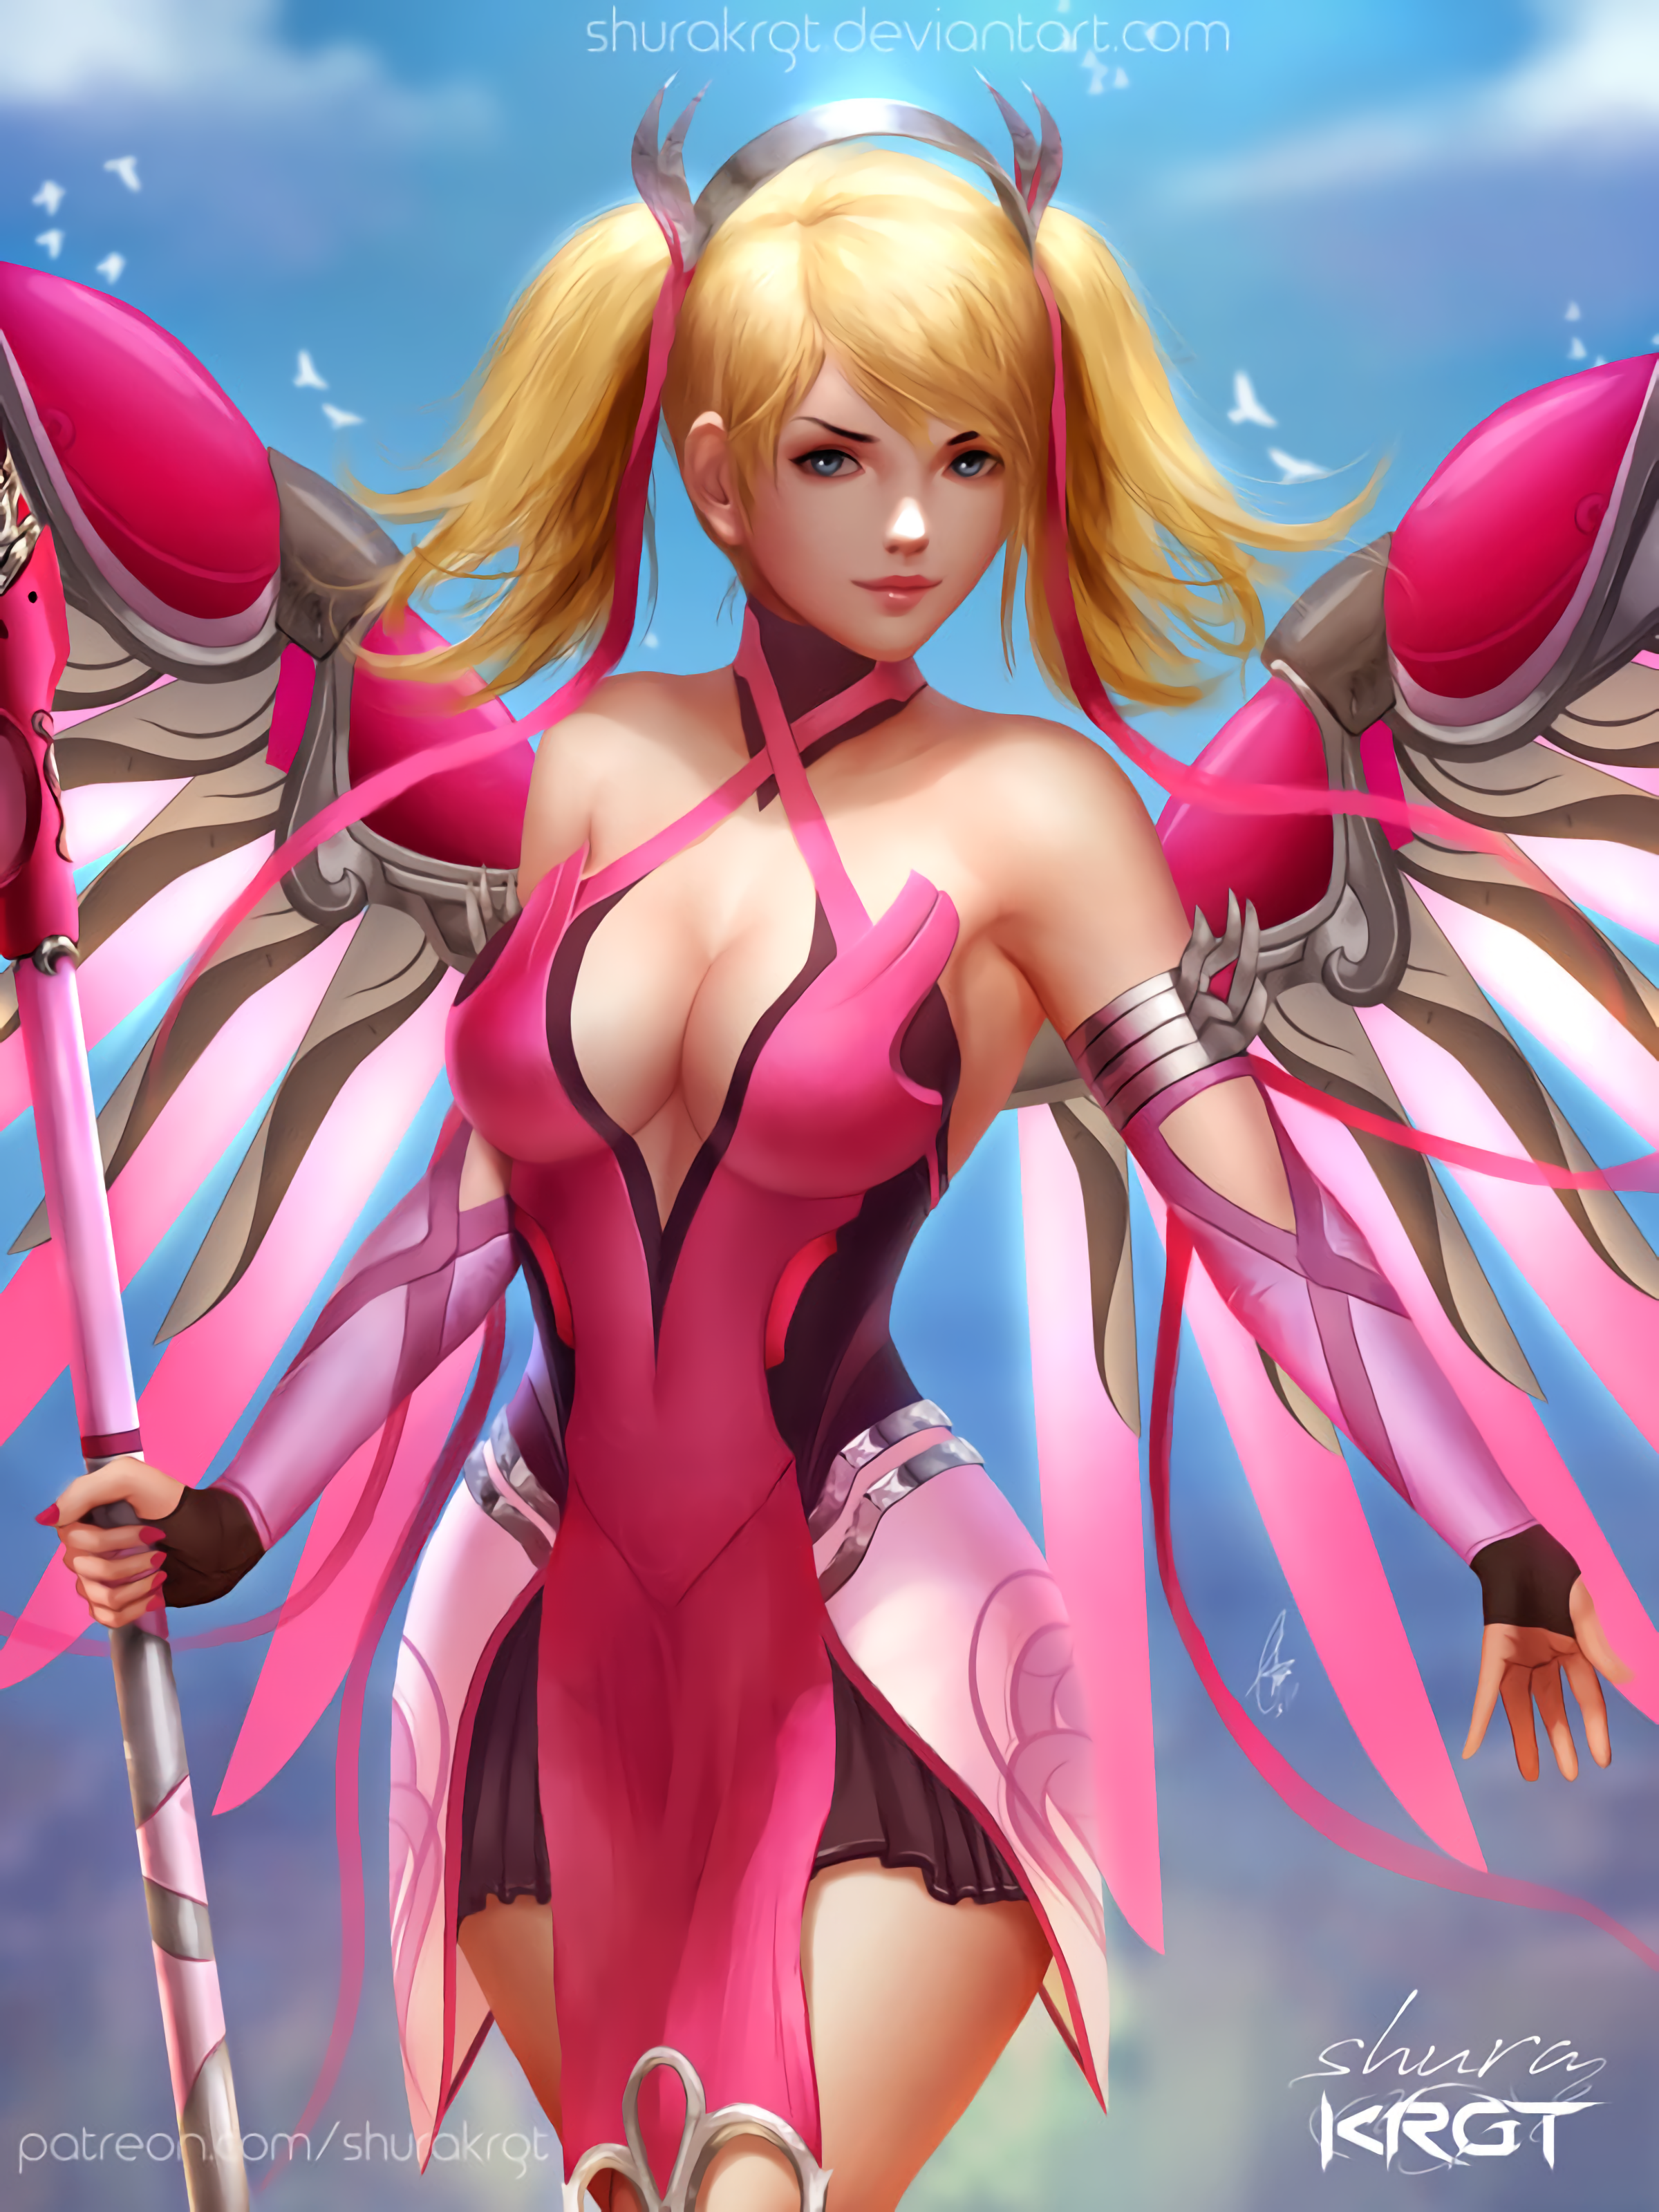 General 2400x3200 Overwatch Mercy (Overwatch) Pink Mercy (Overwatch) wings blonde video game characters PC gaming DeviantArt boobs long hair standing video game girls fan art